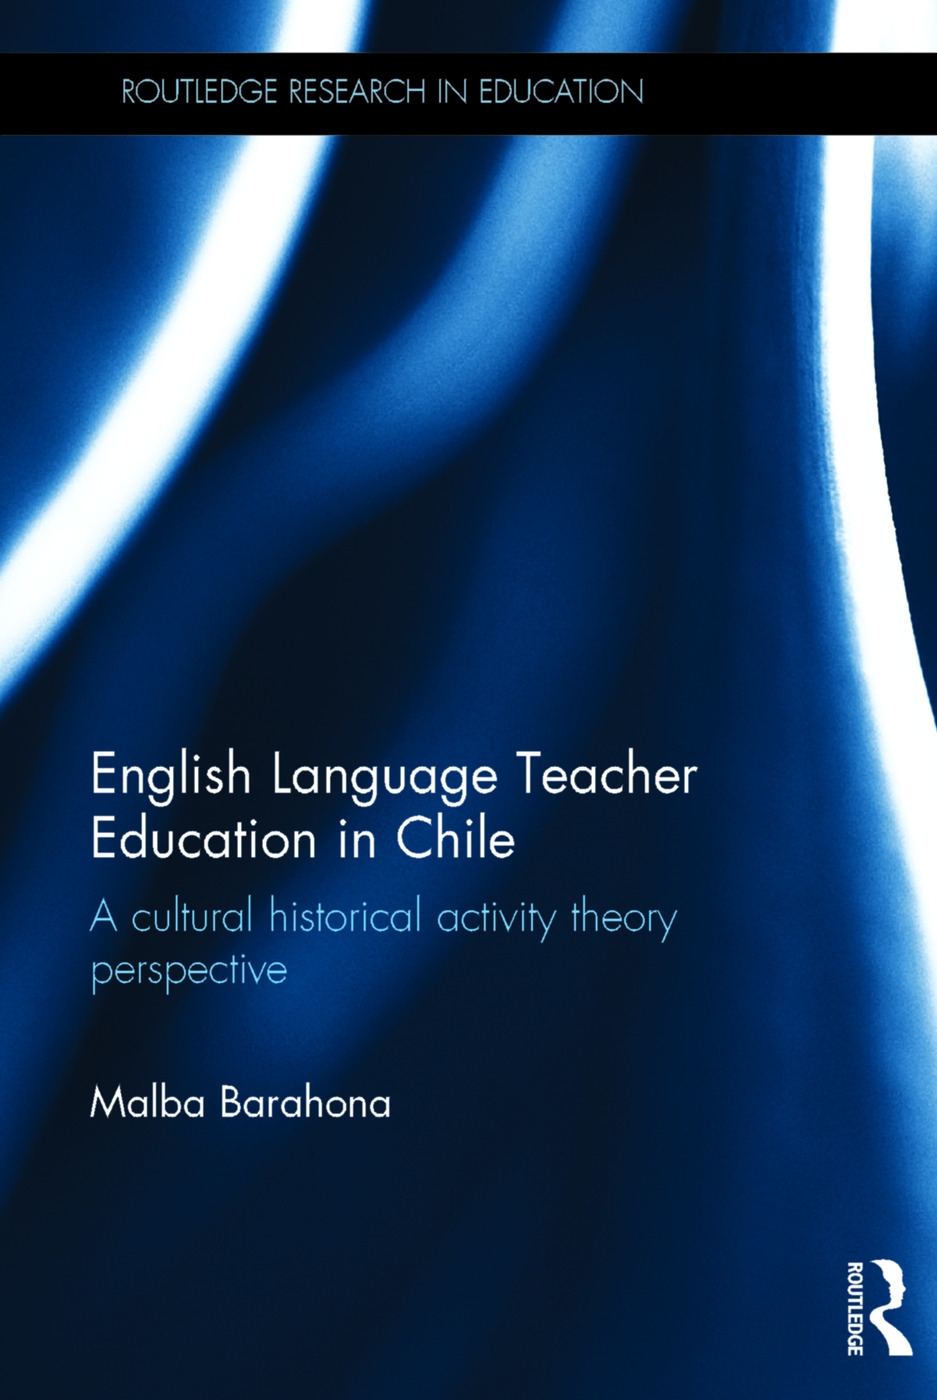 English Language Teacher Education in Chile: A Cultural Historical Activity Theory Perspective